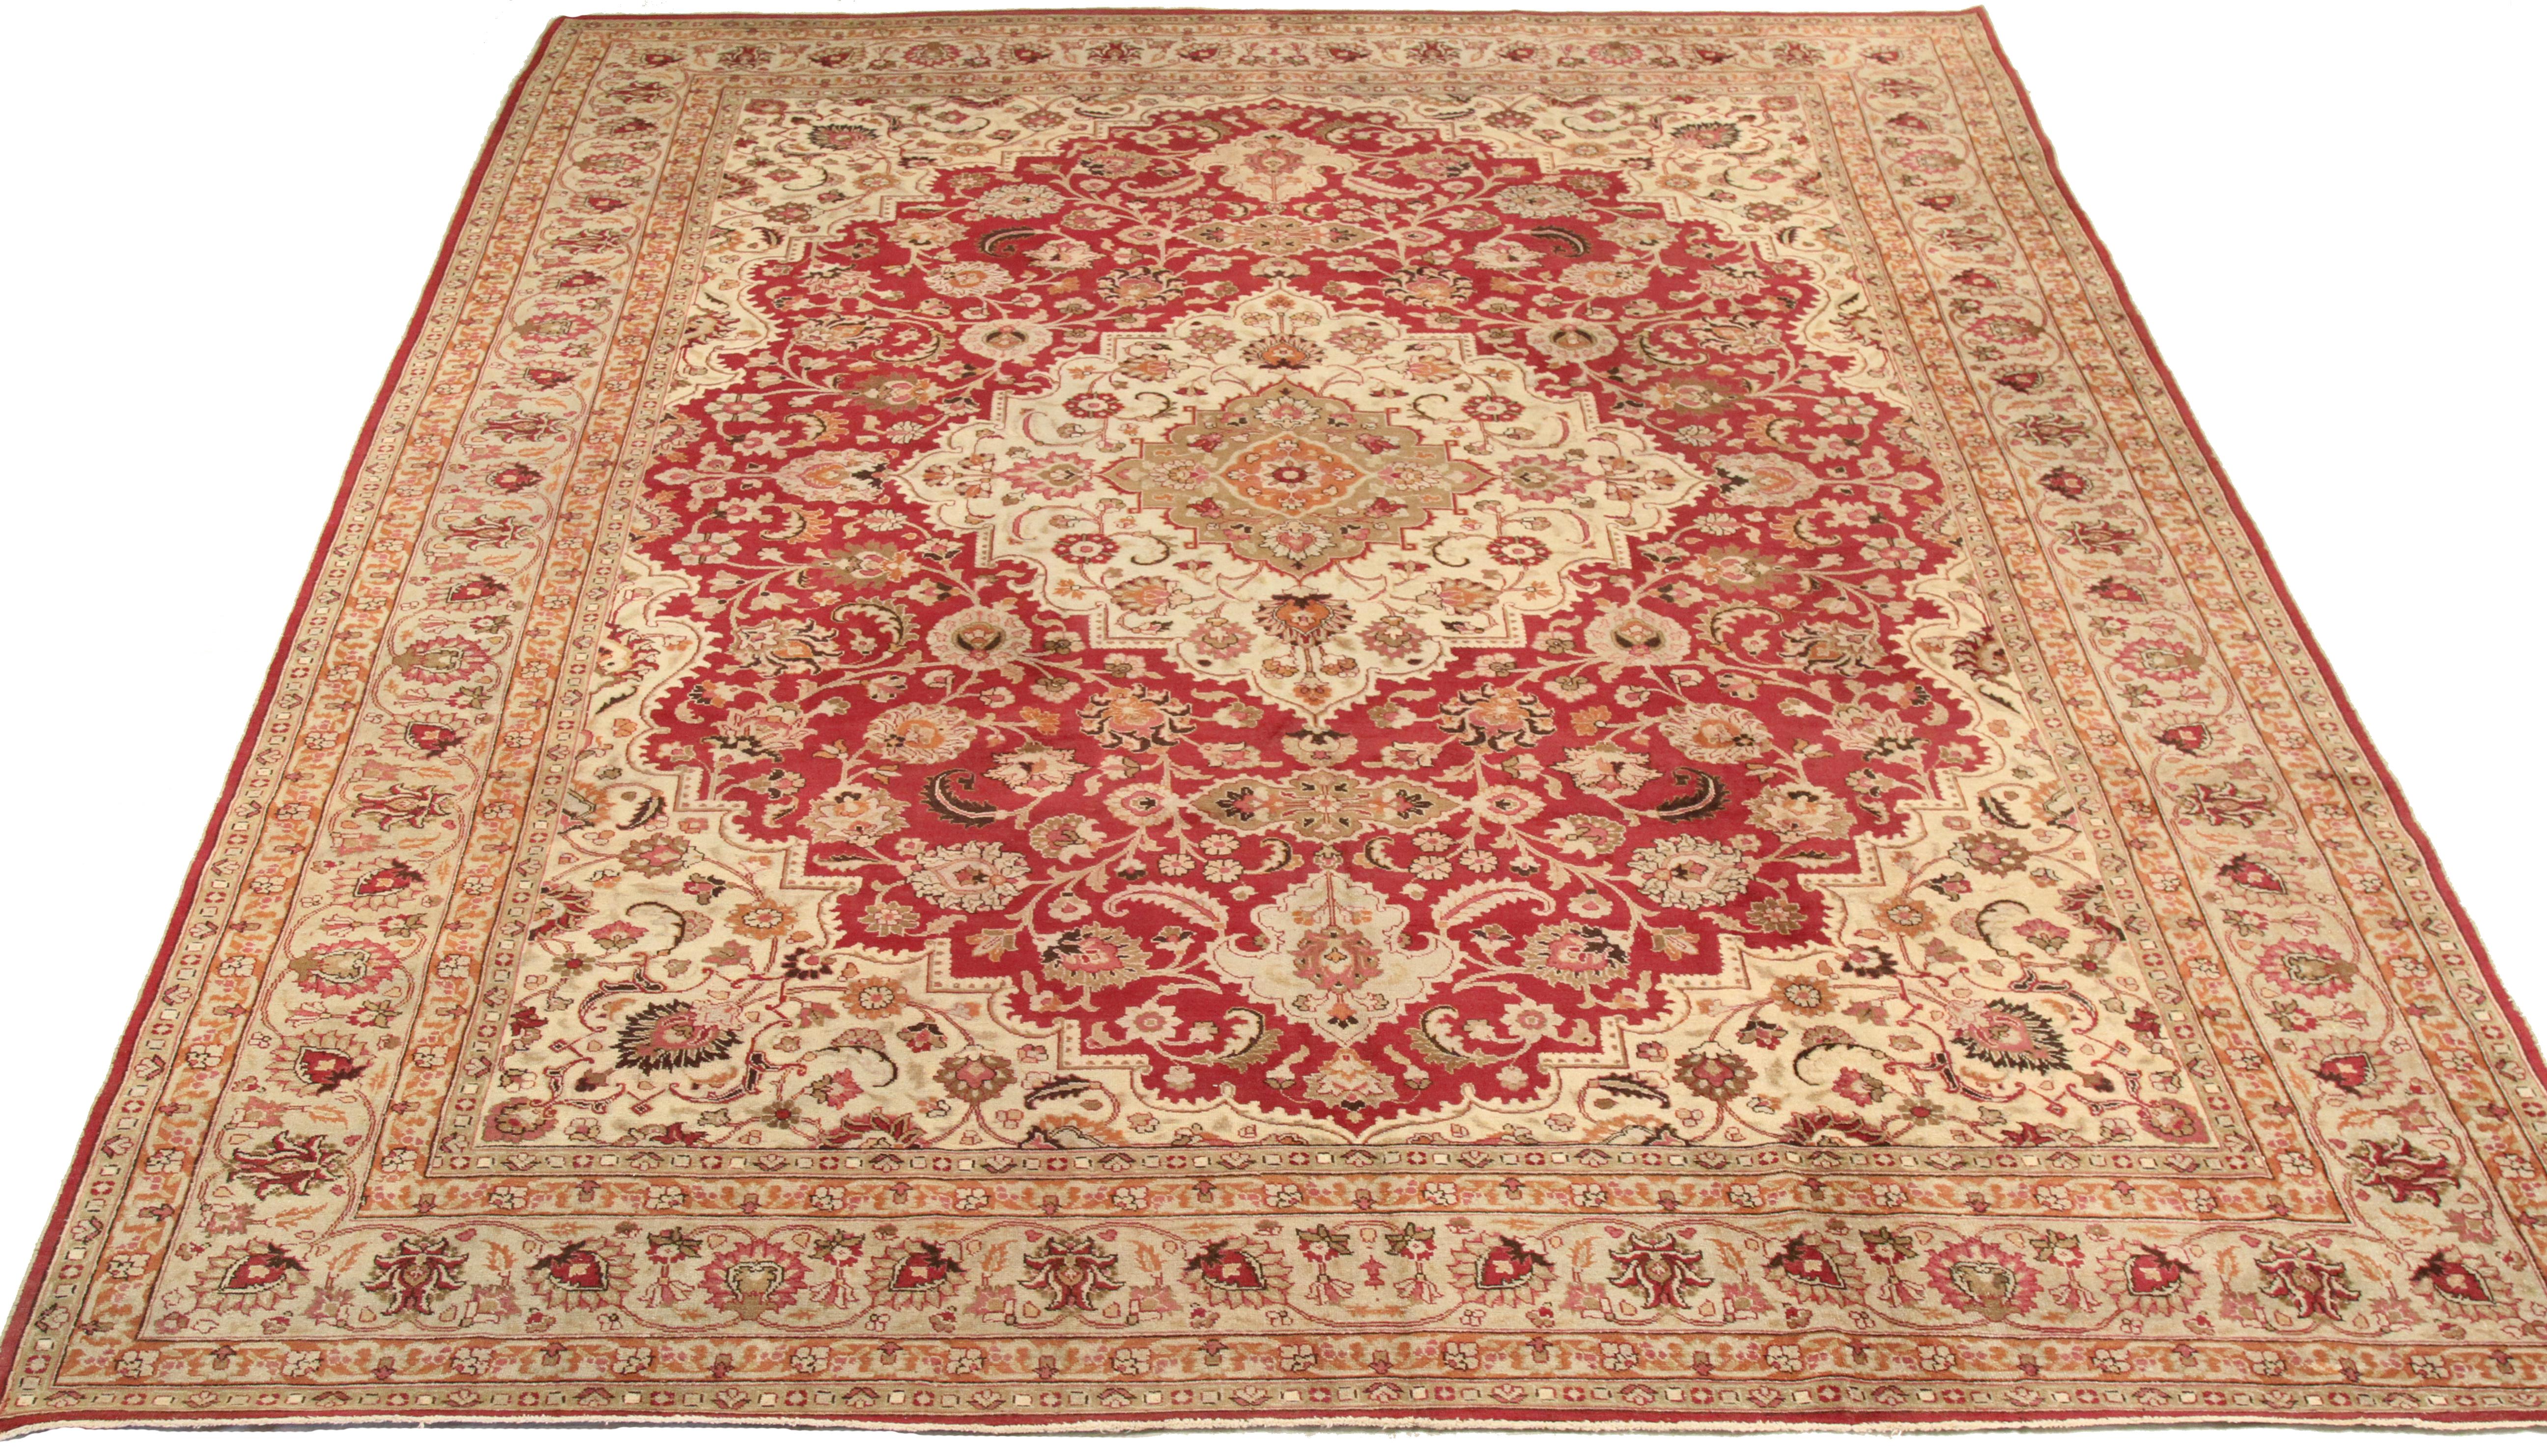 Antique mid-20th century hand knotted Persian area rug made from fine wool and all-natural vegetable dyes that are safe for people and pets. This beautiful piece features intricate floral patterns in various colors which Mashad rugs are known for.